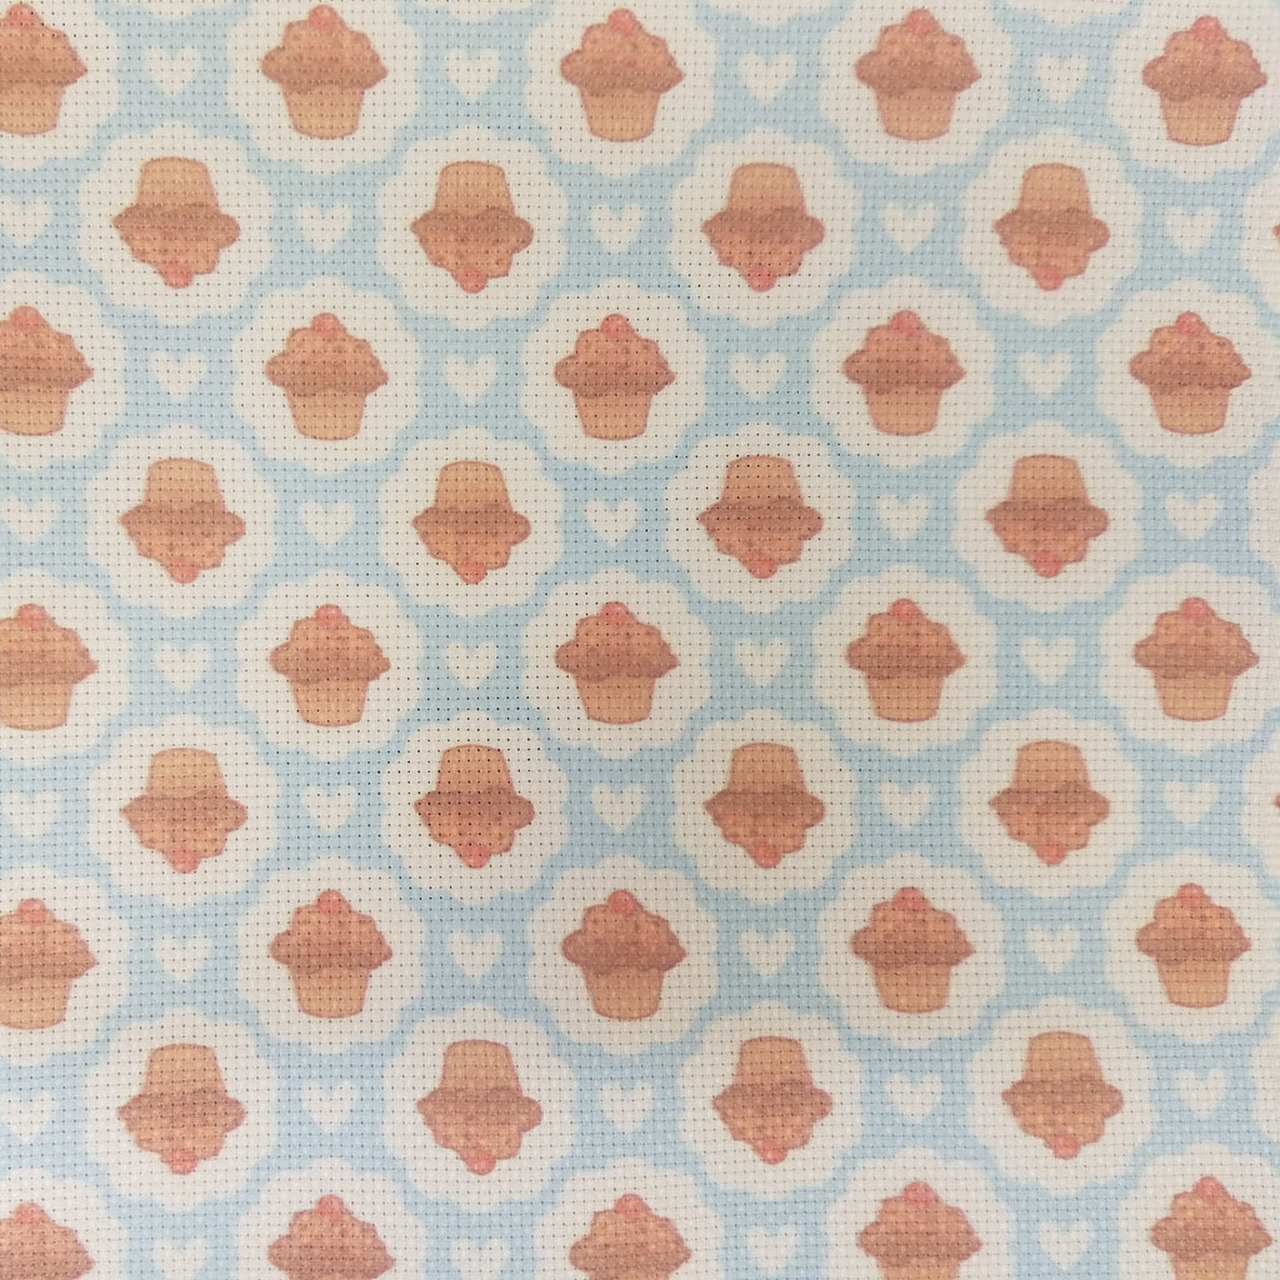 Cupcakes On Blue Patterned Cross Stitch Fabric